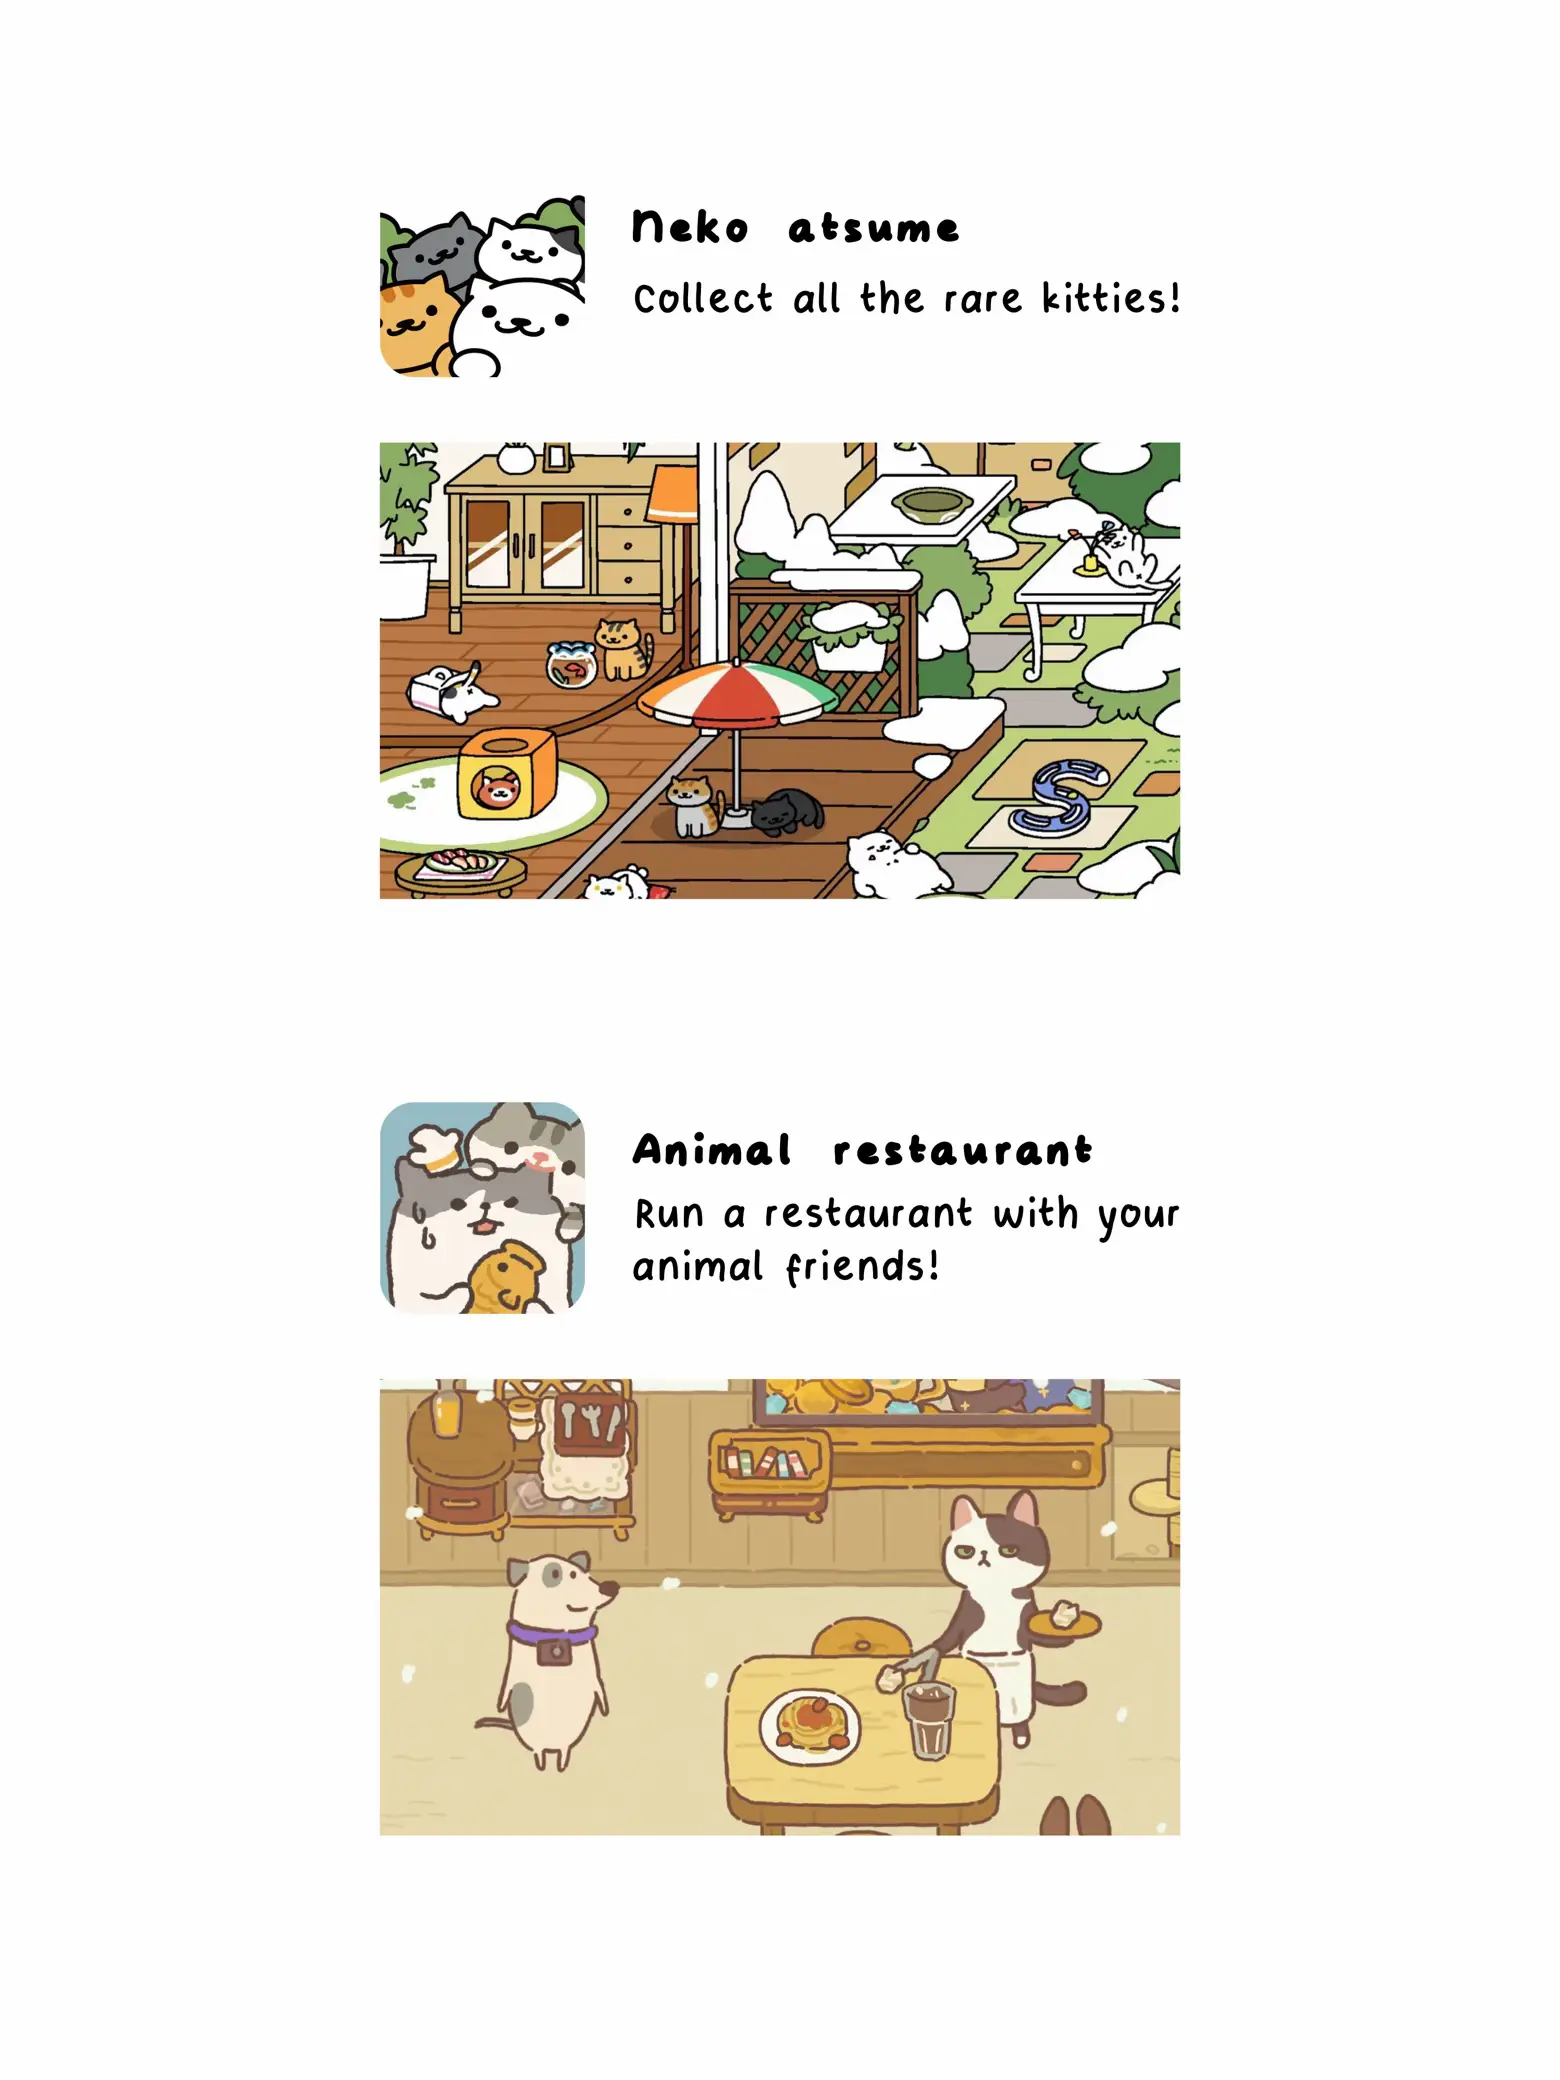  Three pictures of a cat running through a restaurant.